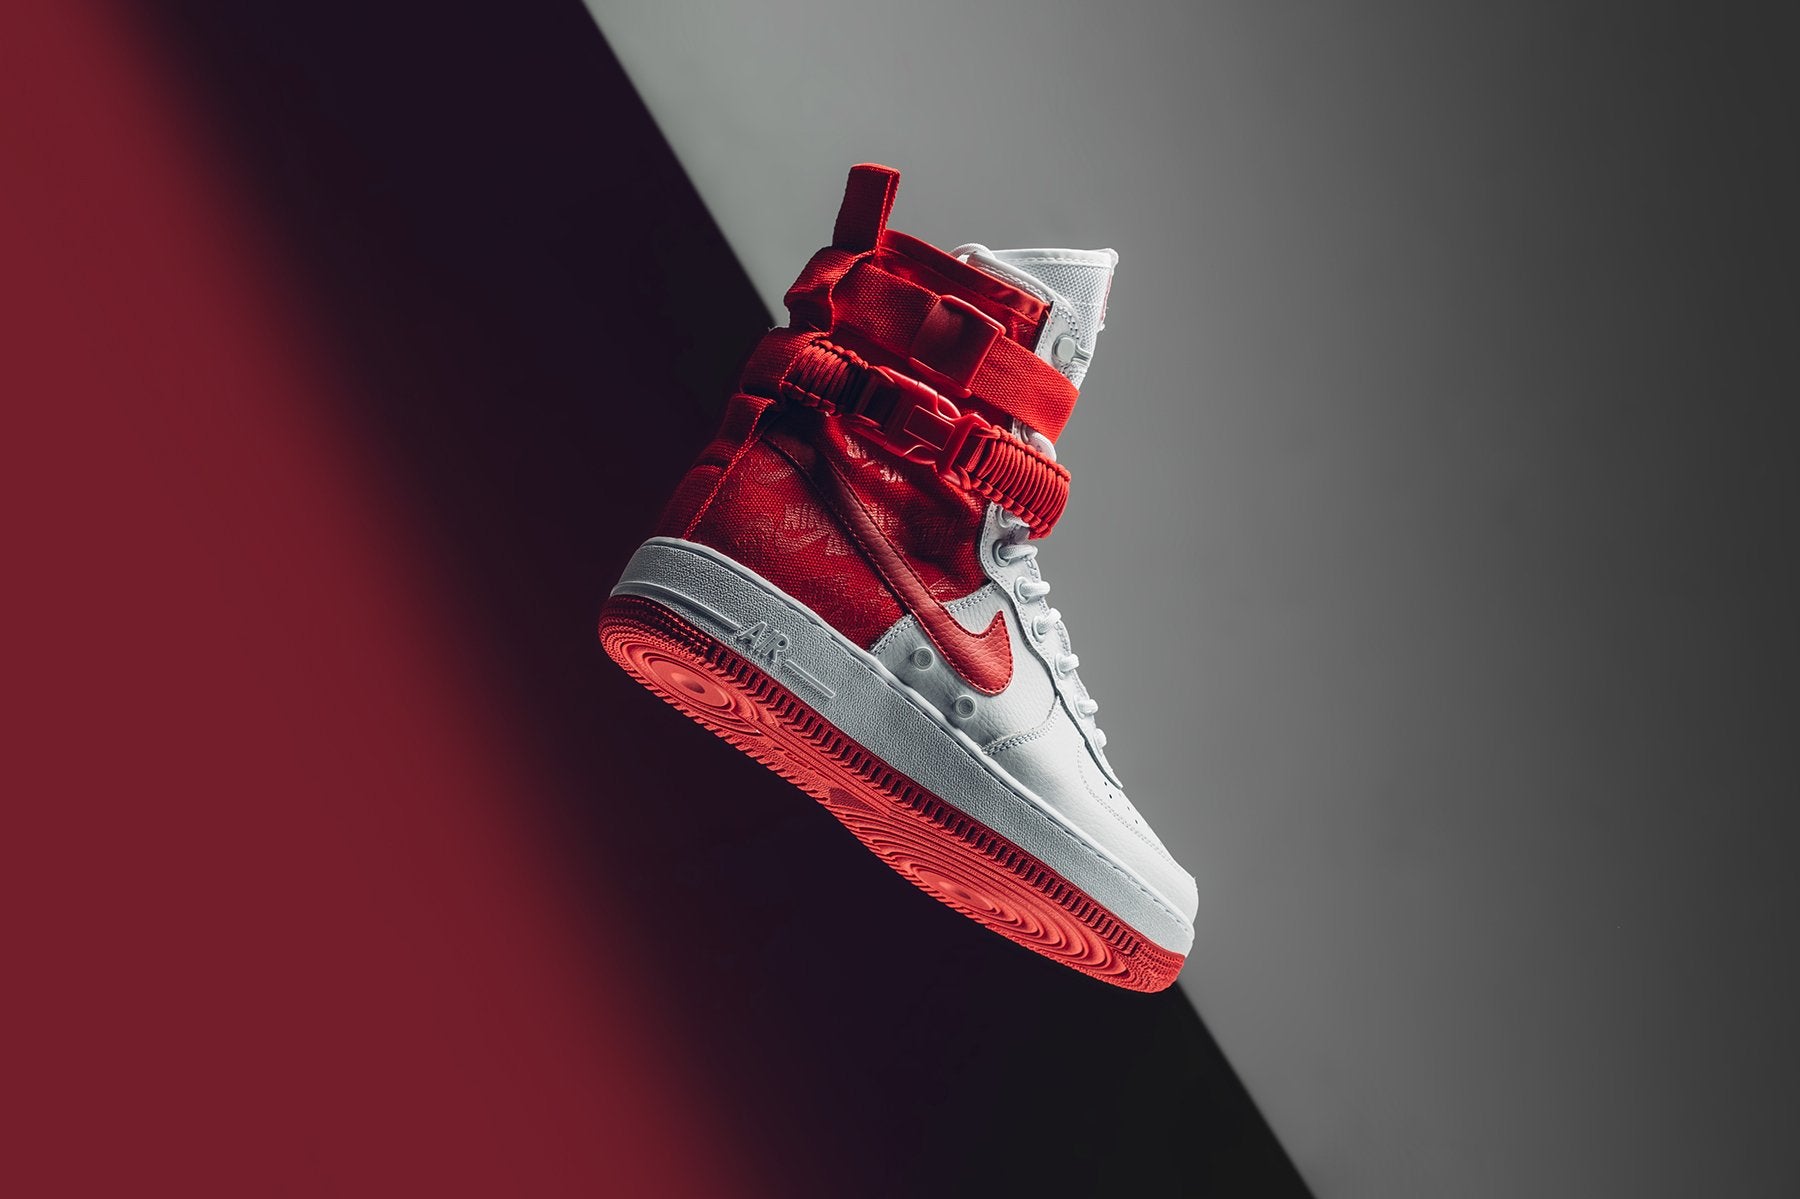 Nike SF-AF1 High University Red AR1955-100 Available Now